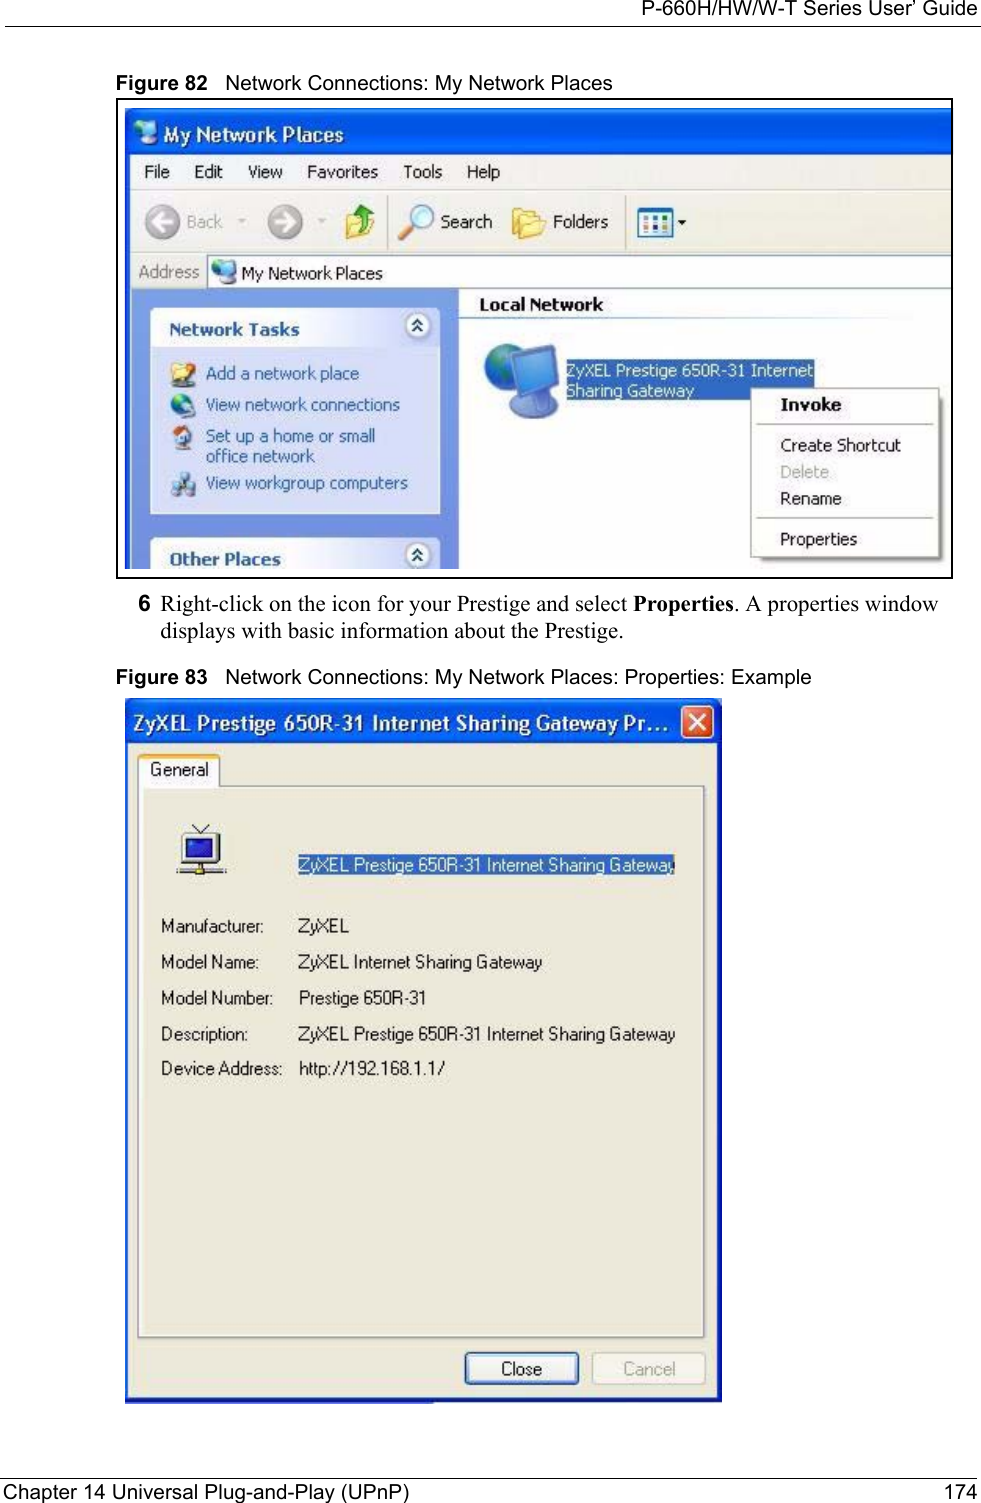 P-660H/HW/W-T Series User’ GuideChapter 14 Universal Plug-and-Play (UPnP) 174Figure 82   Network Connections: My Network Places6Right-click on the icon for your Prestige and select Properties. A properties window displays with basic information about the Prestige. Figure 83   Network Connections: My Network Places: Properties: Example